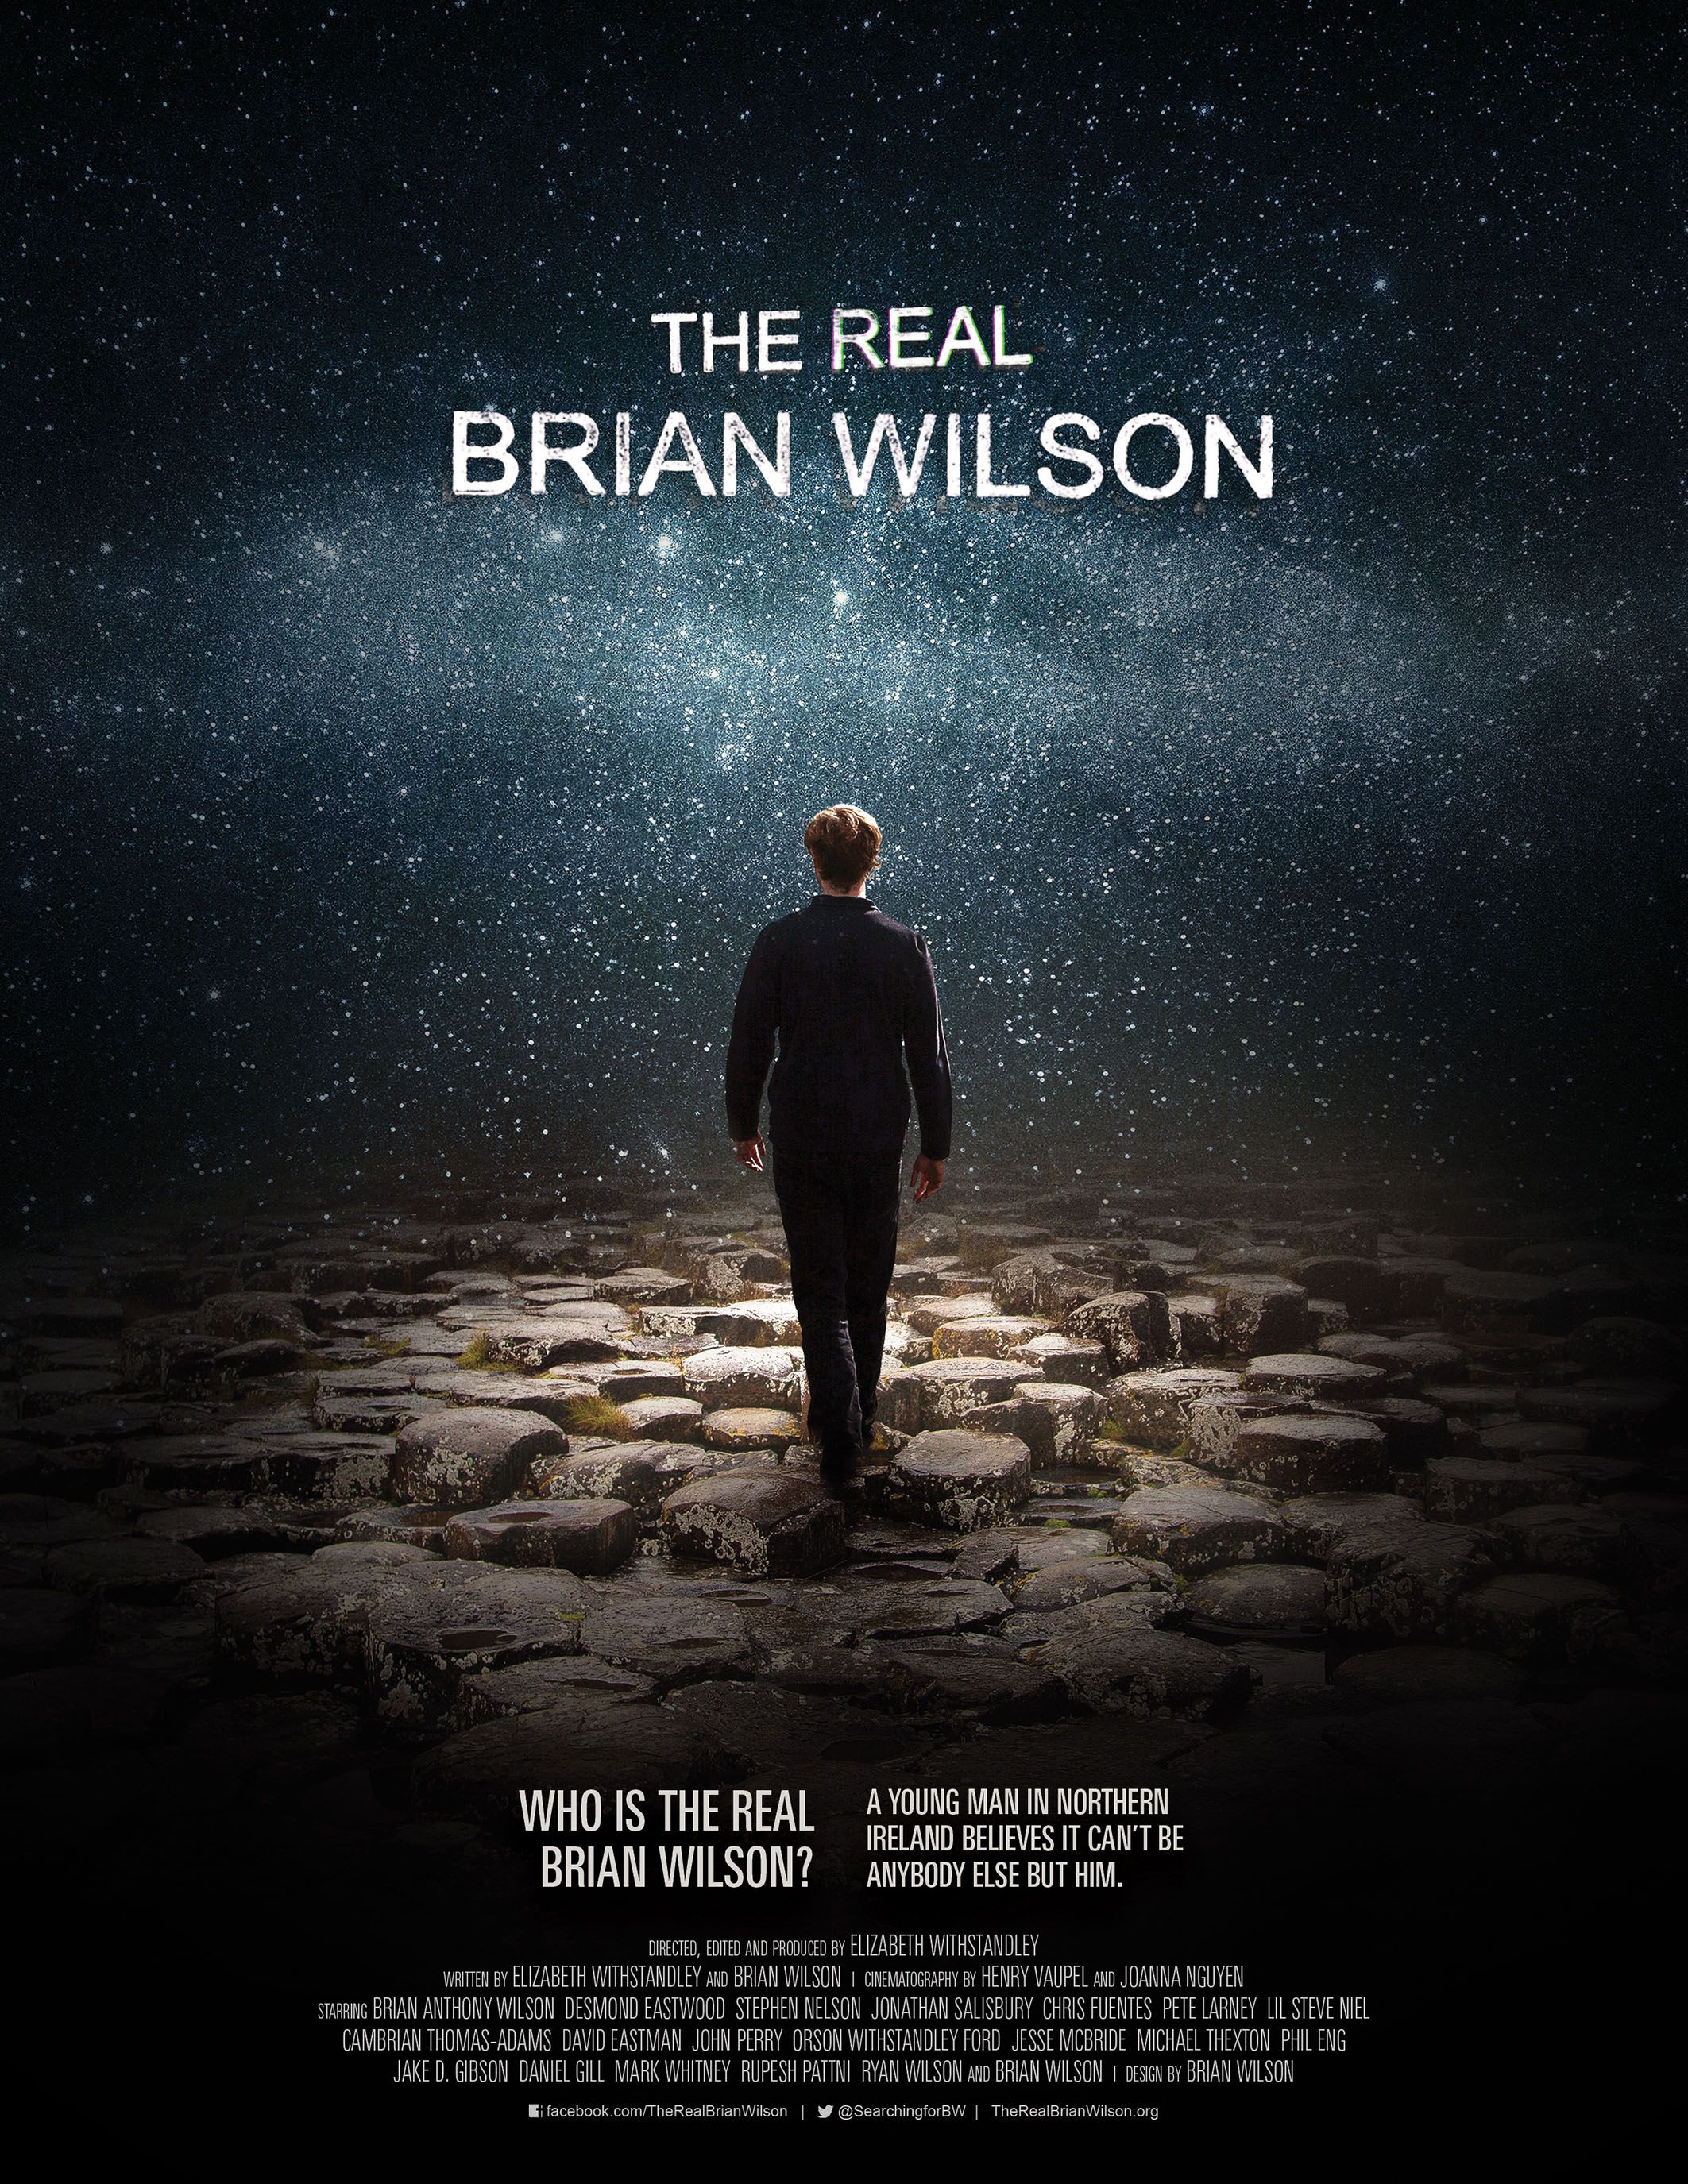 The Real Brian Wilson poster - back view of a man walking on a rocky road against a background of stars